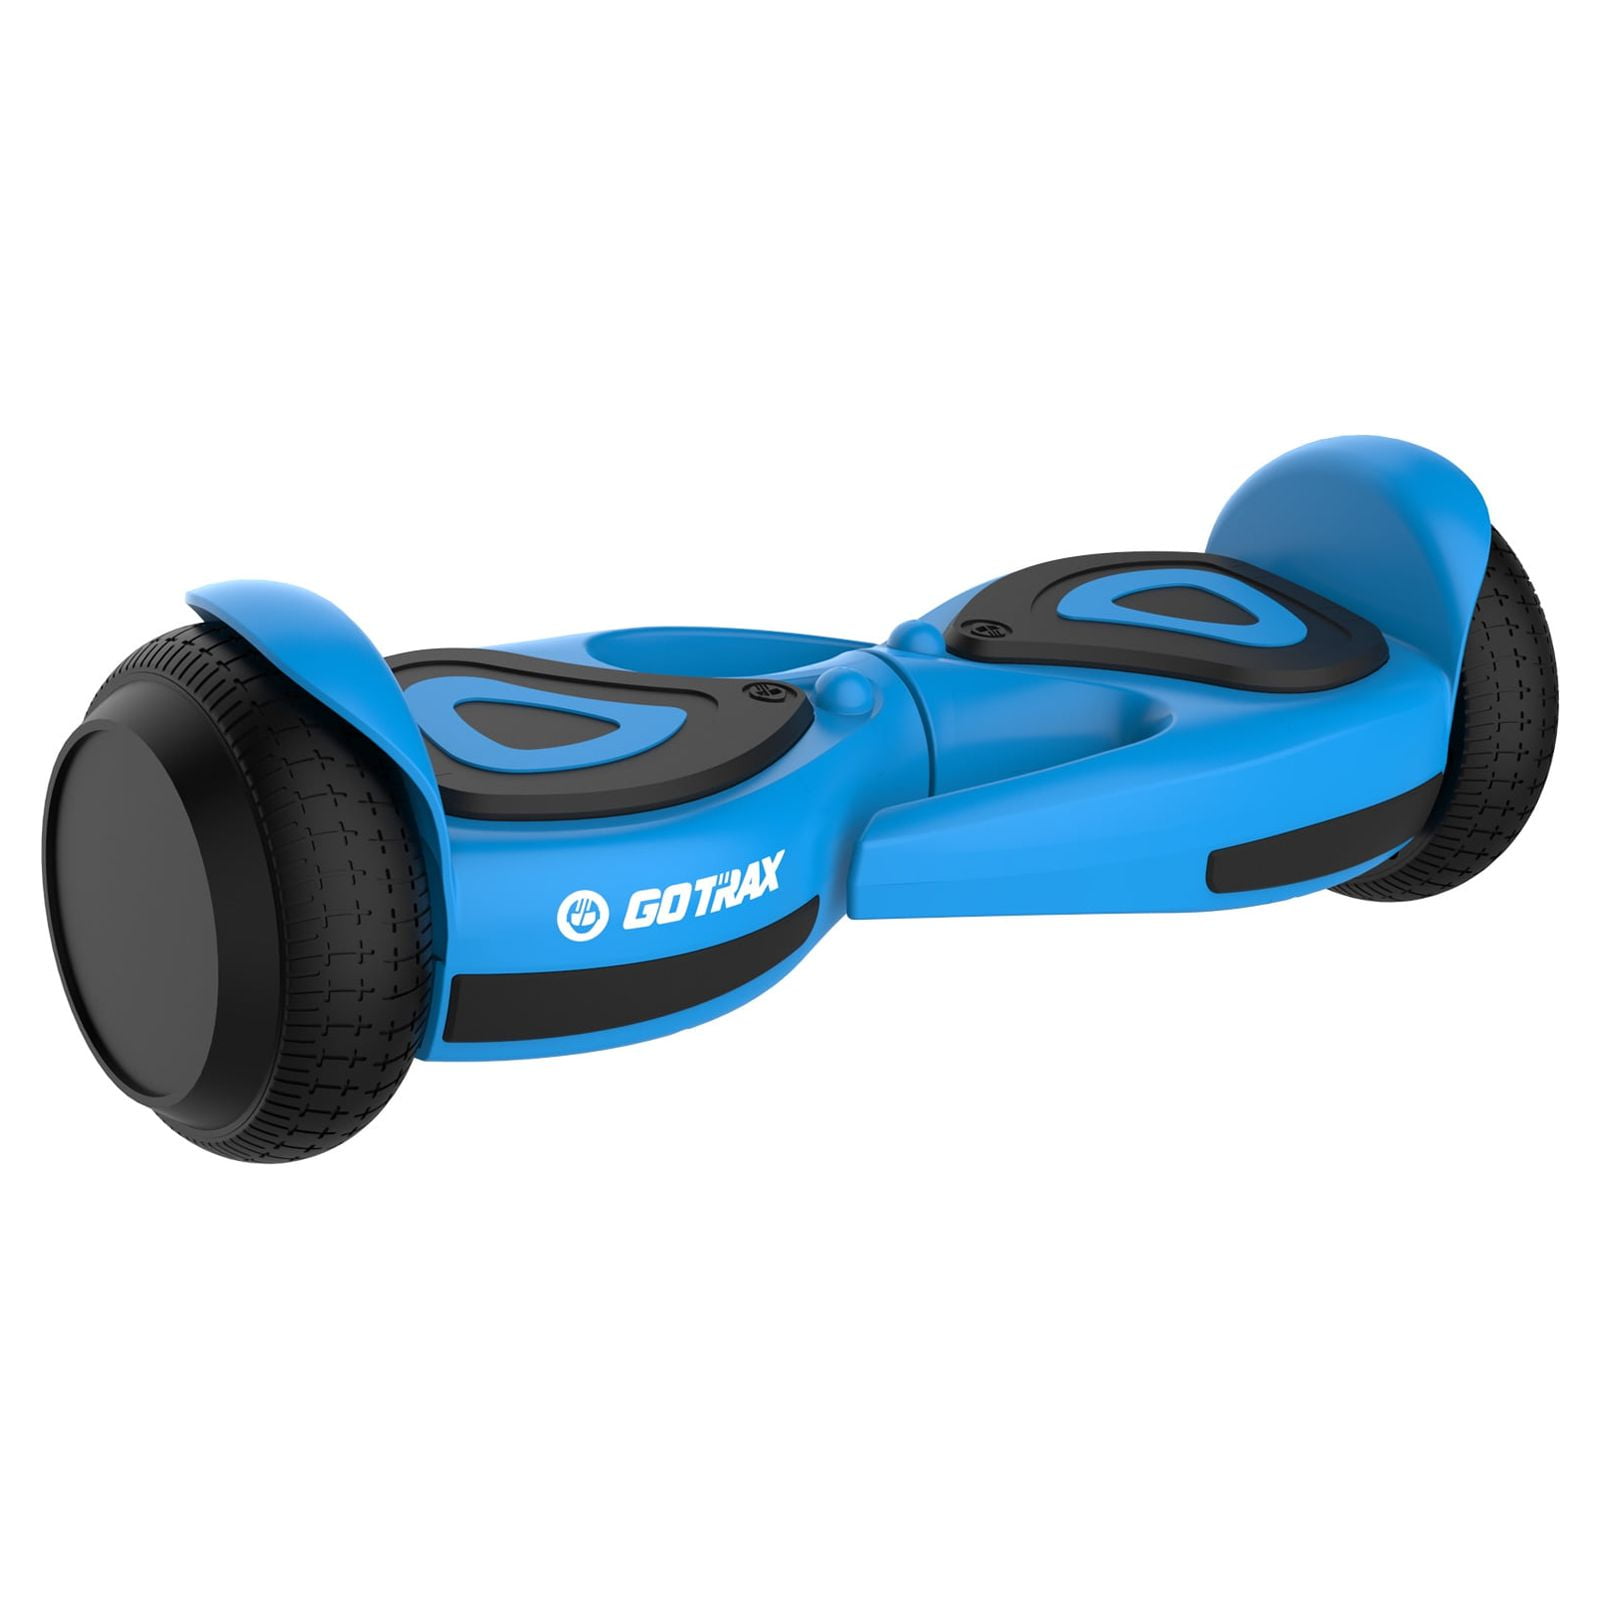 GOTRAX SRX Mini Hoverboard for Kids Ages 6-12, 6.5 Wheels 150W